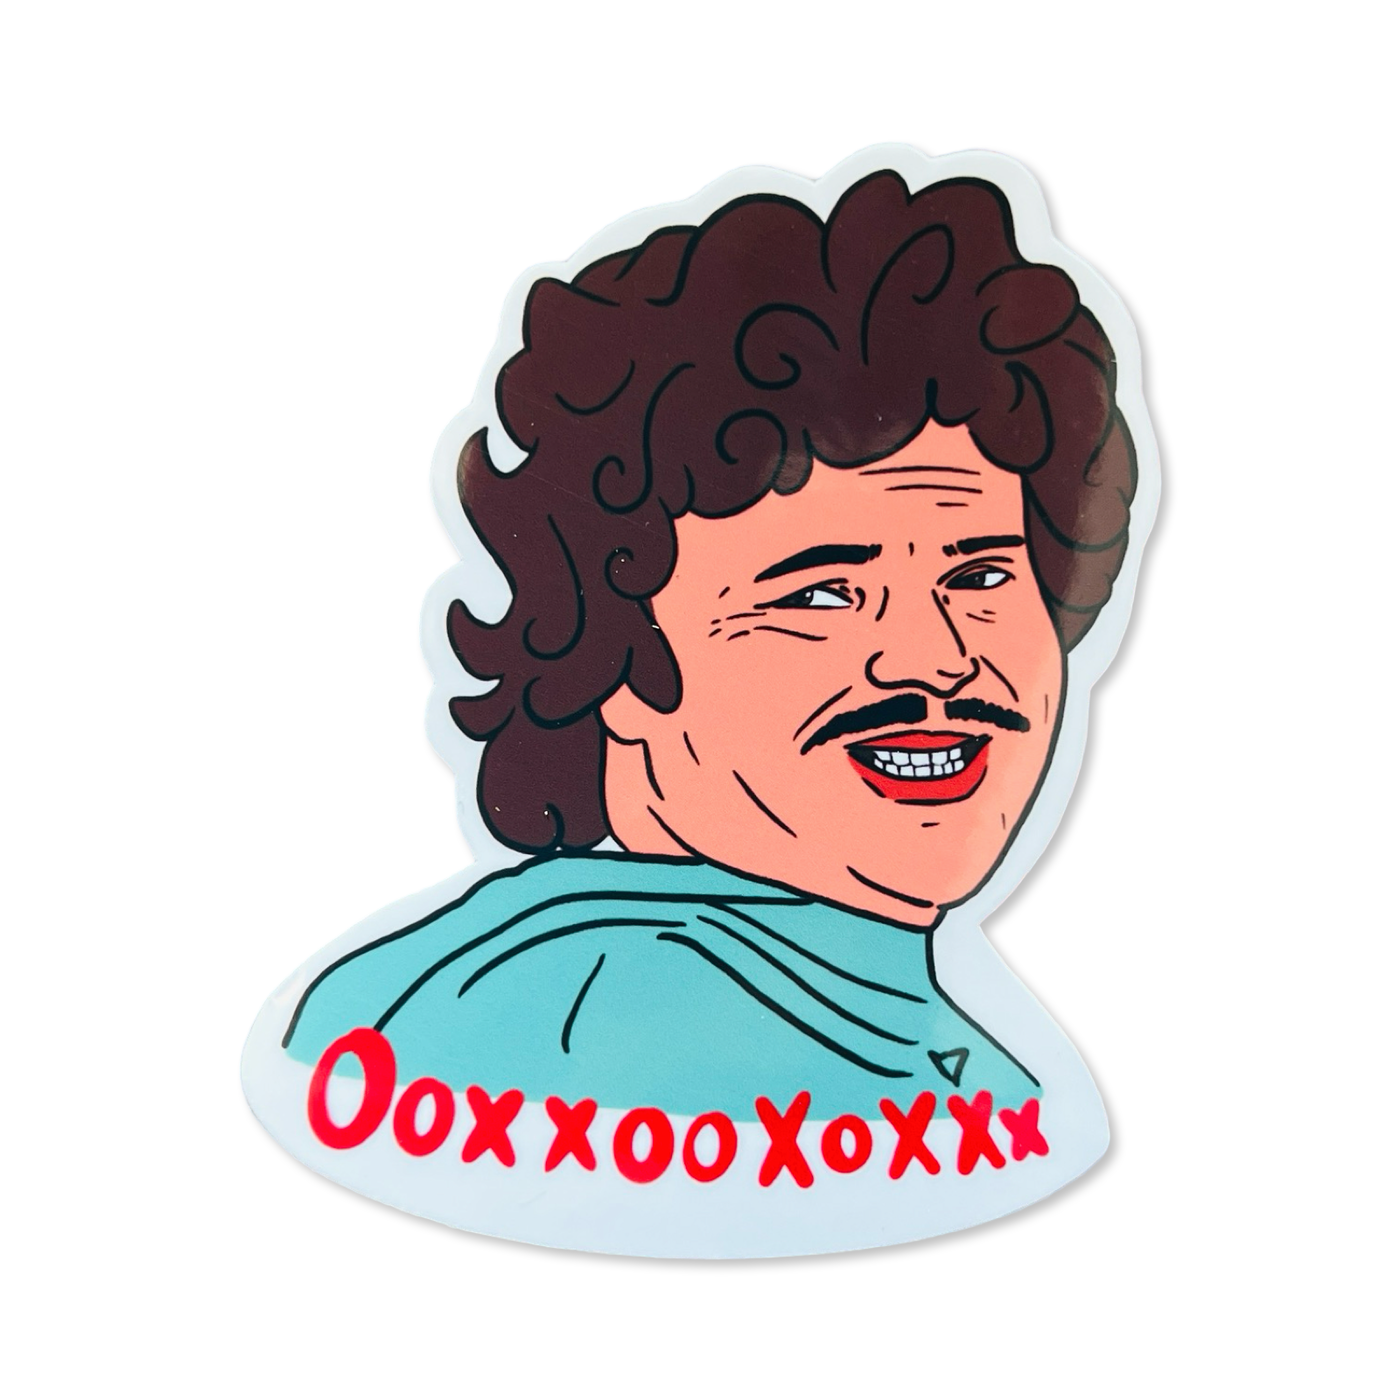 Nacho Libre smiling and the letters OOXXOOXOXXX in red lettering